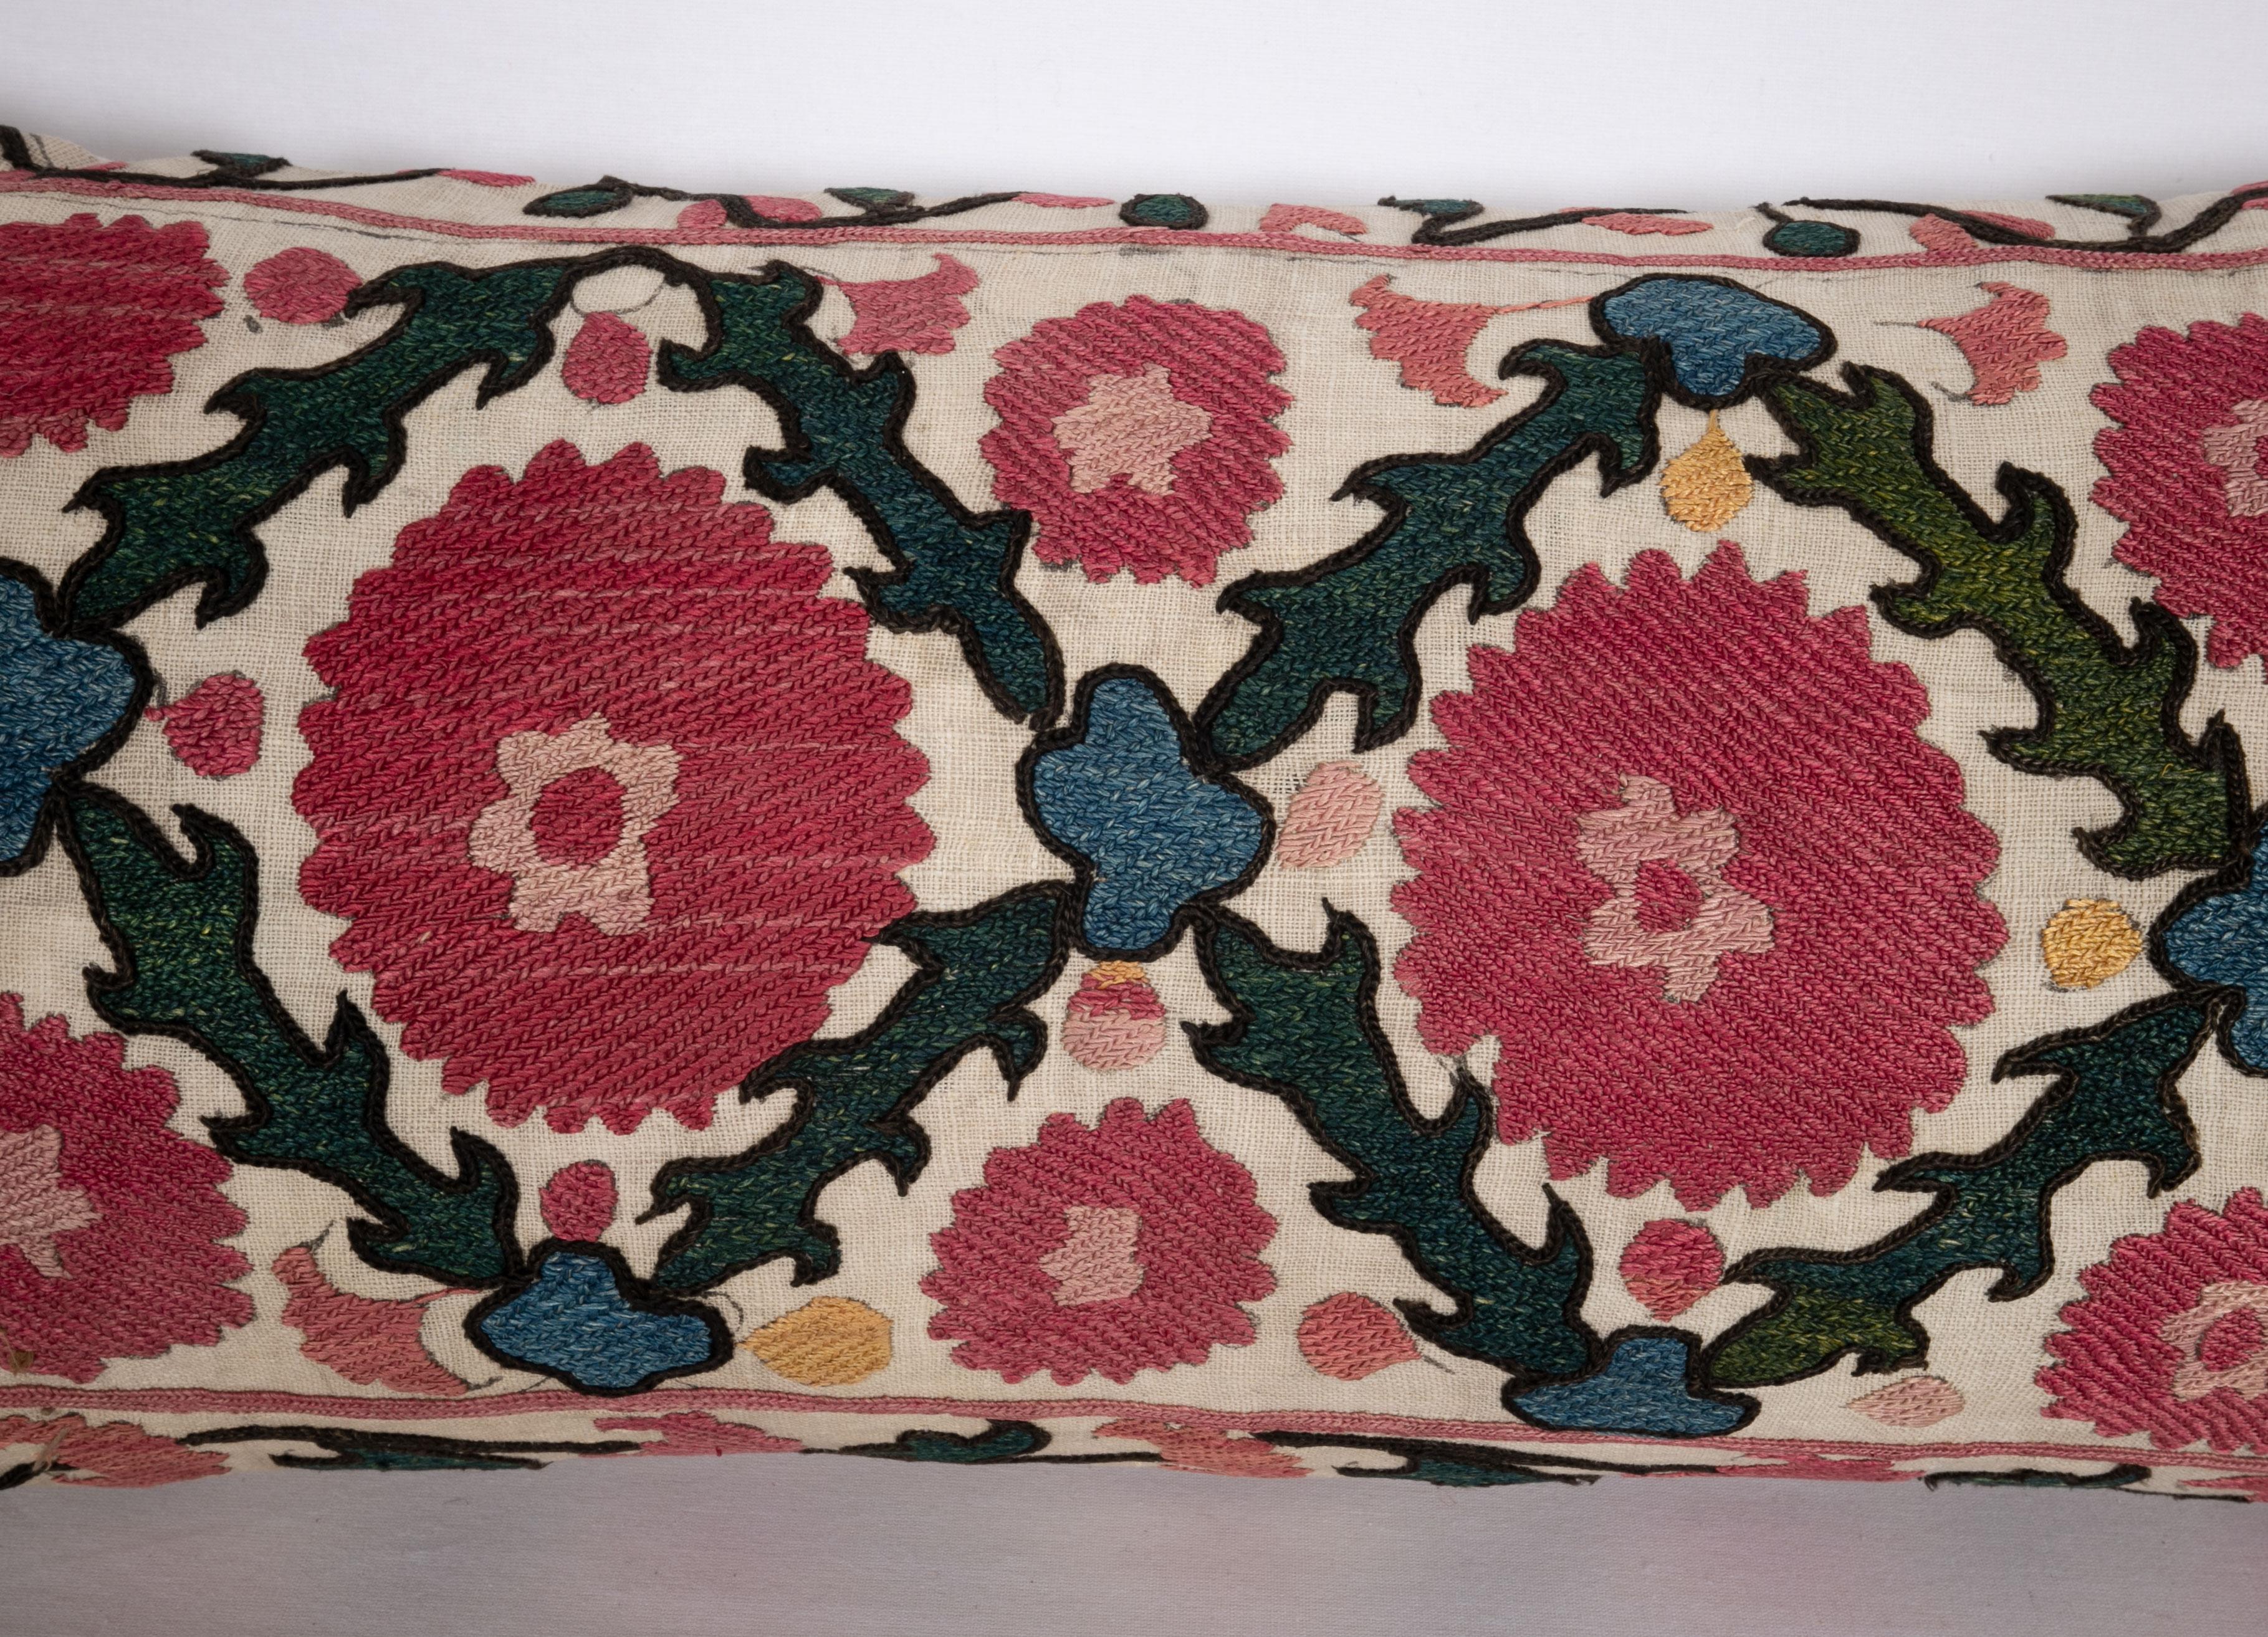 Embroidered Antique Suzani Pillow Case Made from a 19th C. Ura Tube Suzani from Tajikistan,